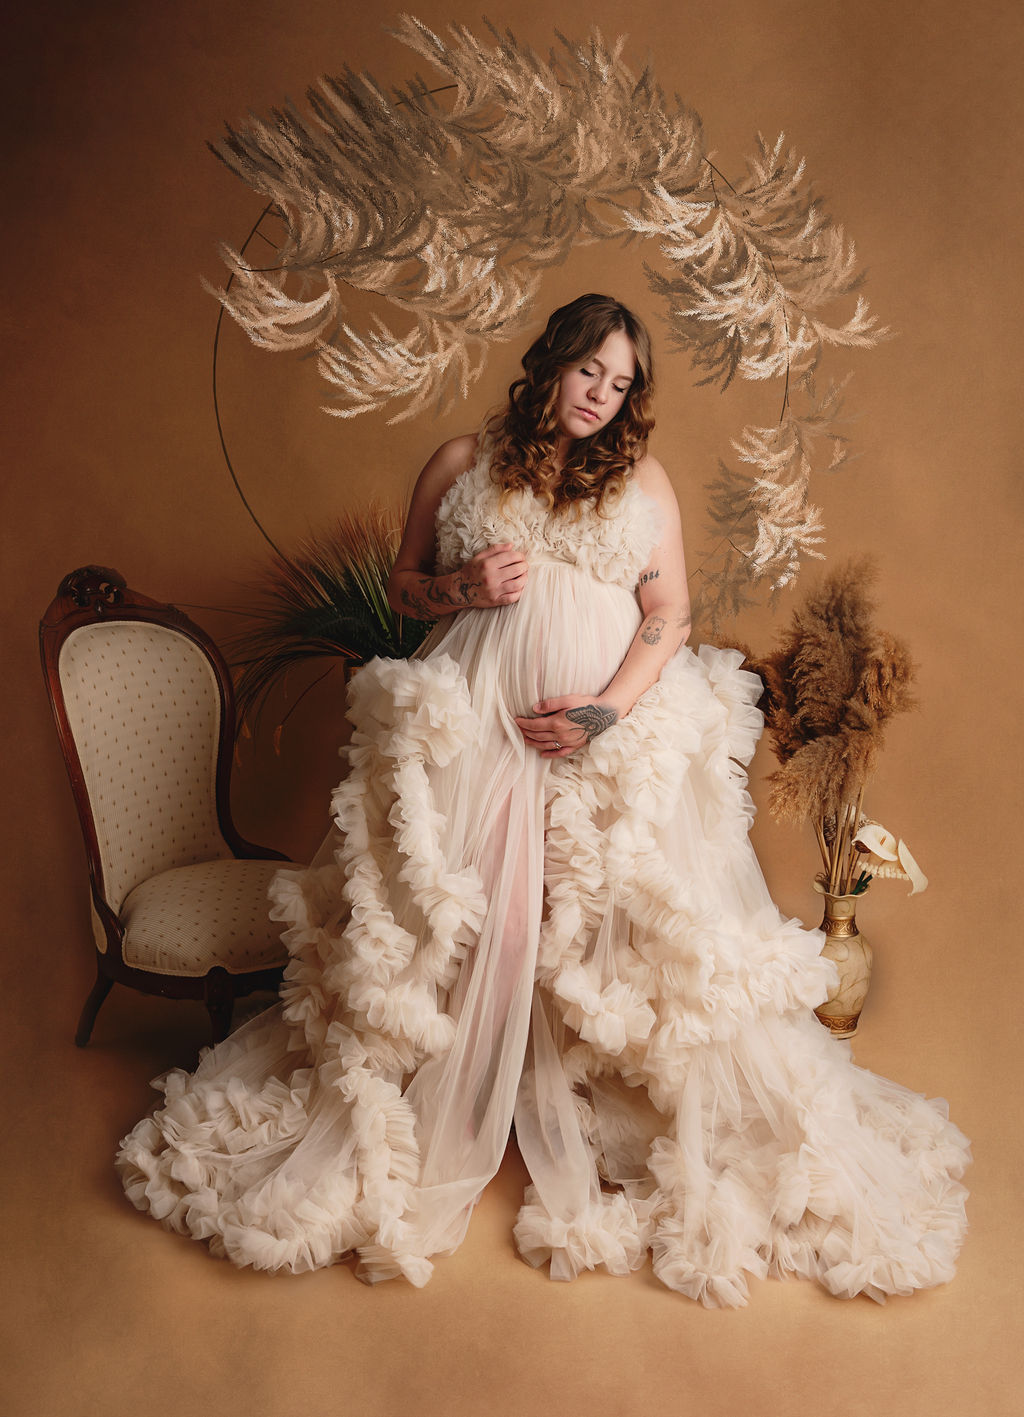 Mom to be in neutral tulle maternity gown in an ornate room Access Midwives